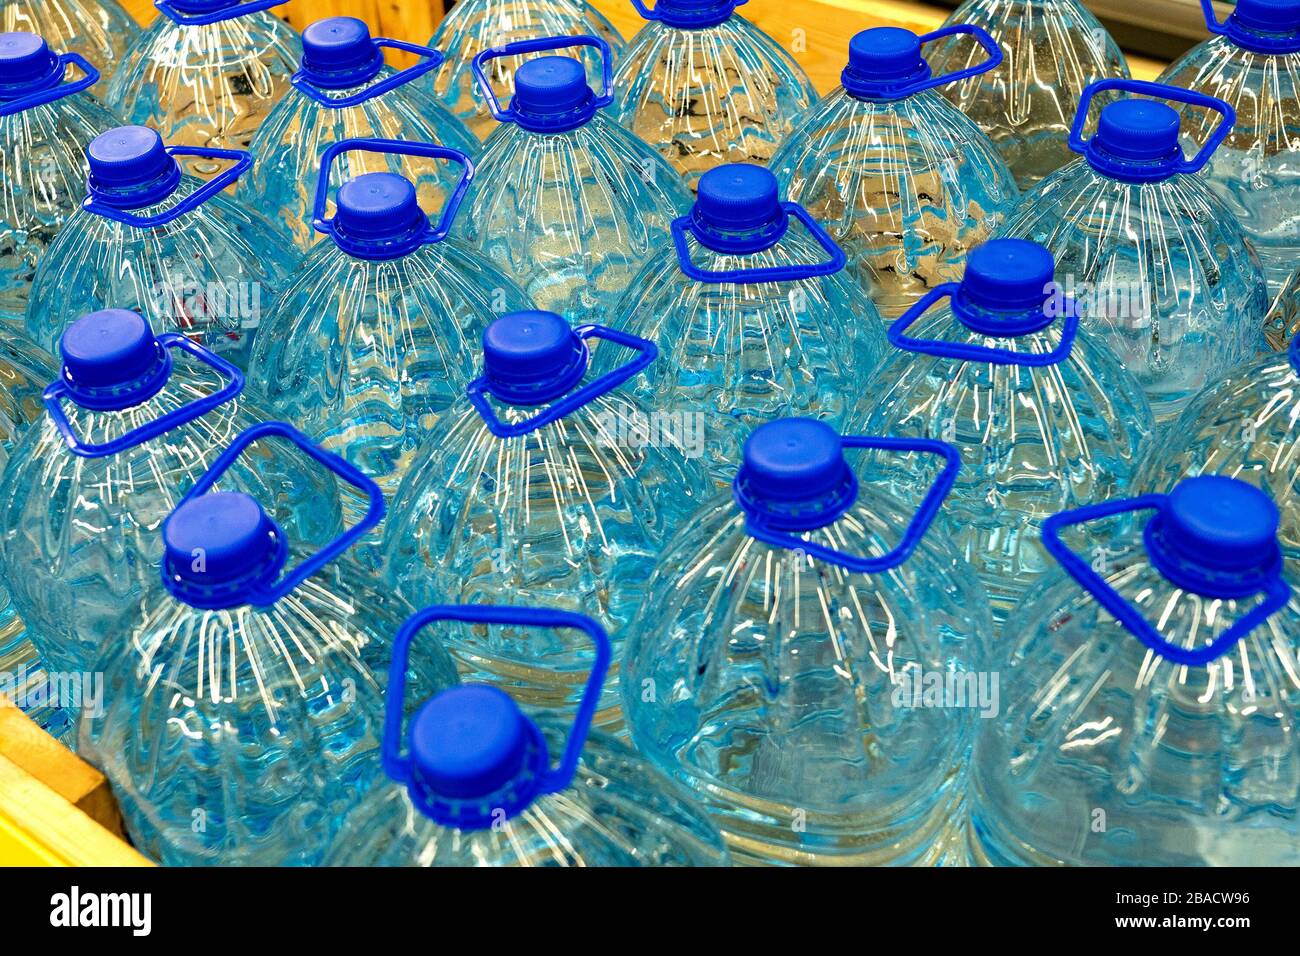 Stock of drinking bottled water. Drinking water bottles in a store. Party plastic bottles of water Stock Photo